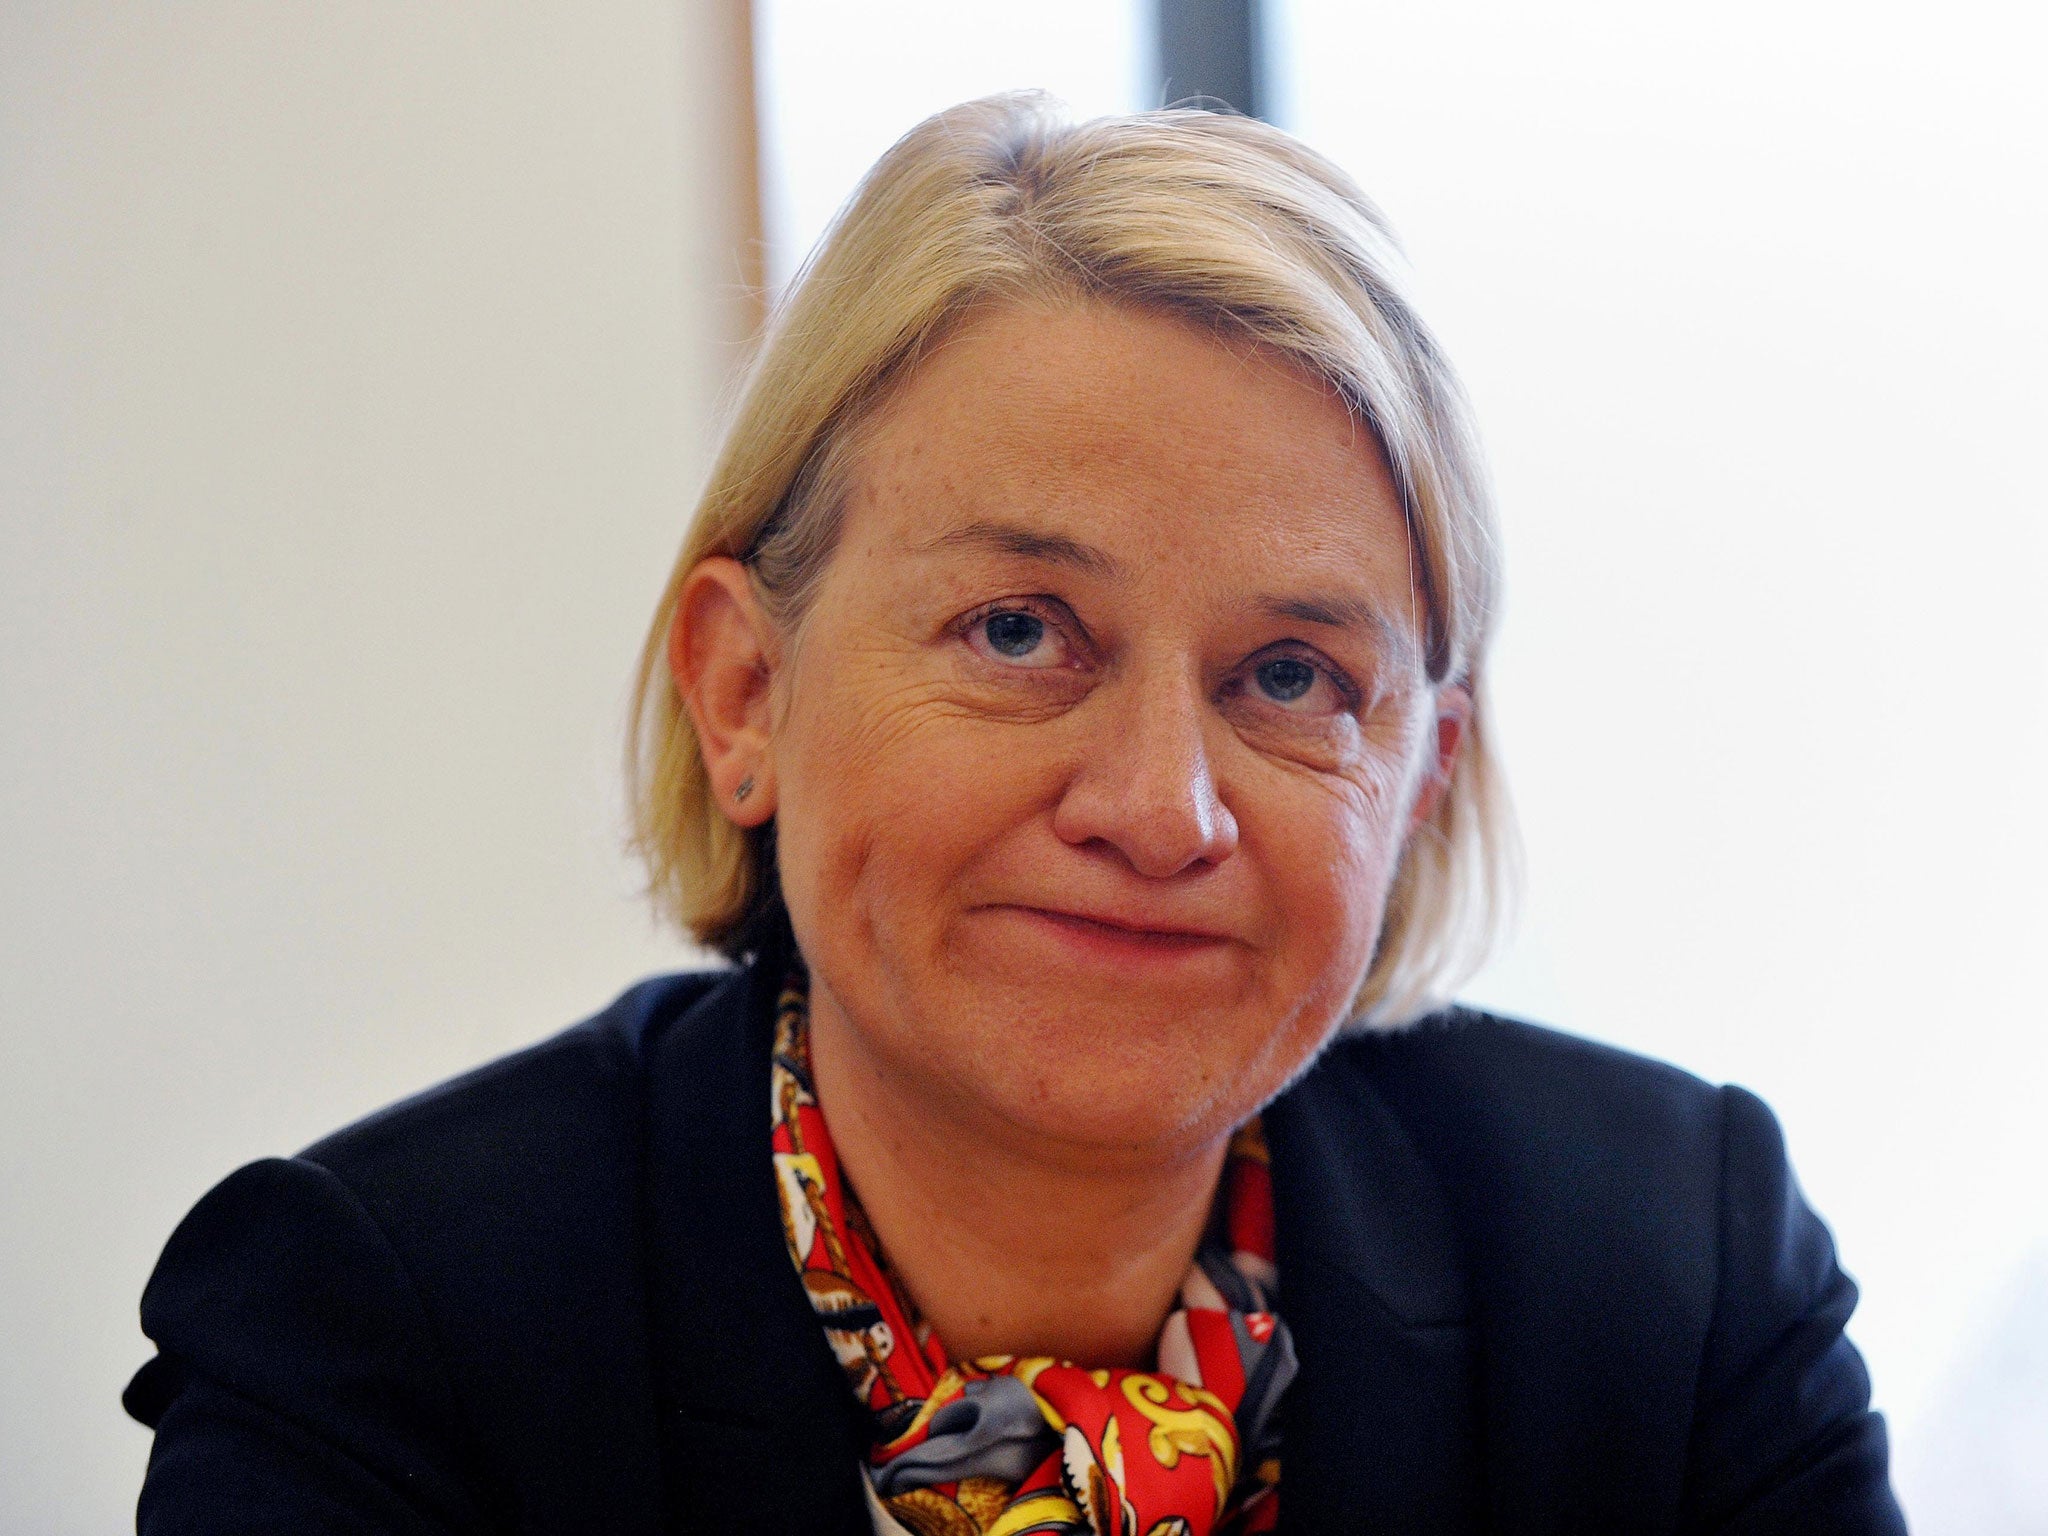 Natalie Bennett, leader of the Green Party, whose membership could overtake Ukip's within a week